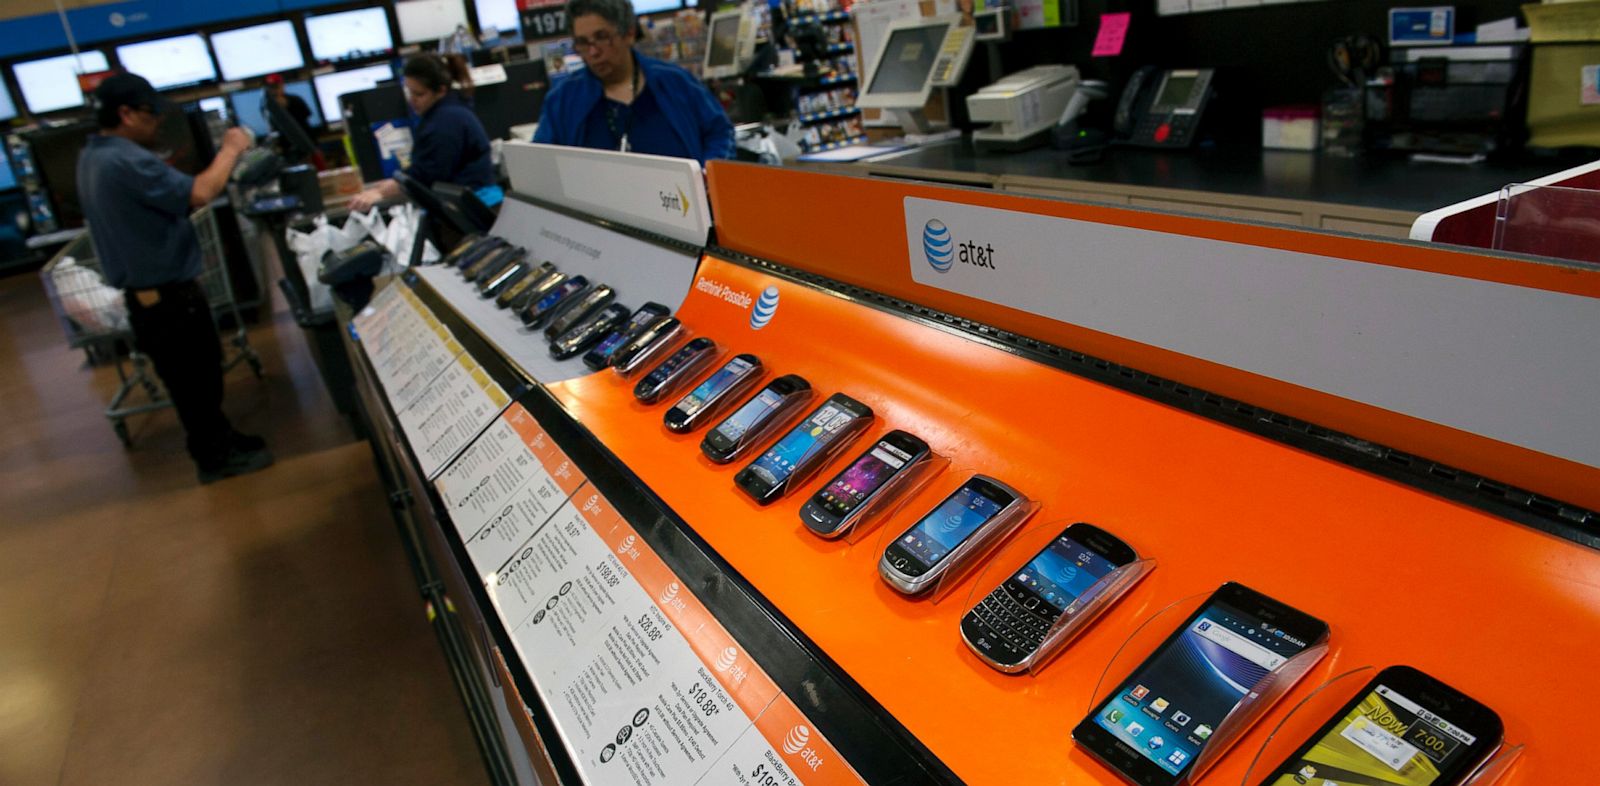 walmart-launches-in-store-smartphone-trade-in-program-abc-news